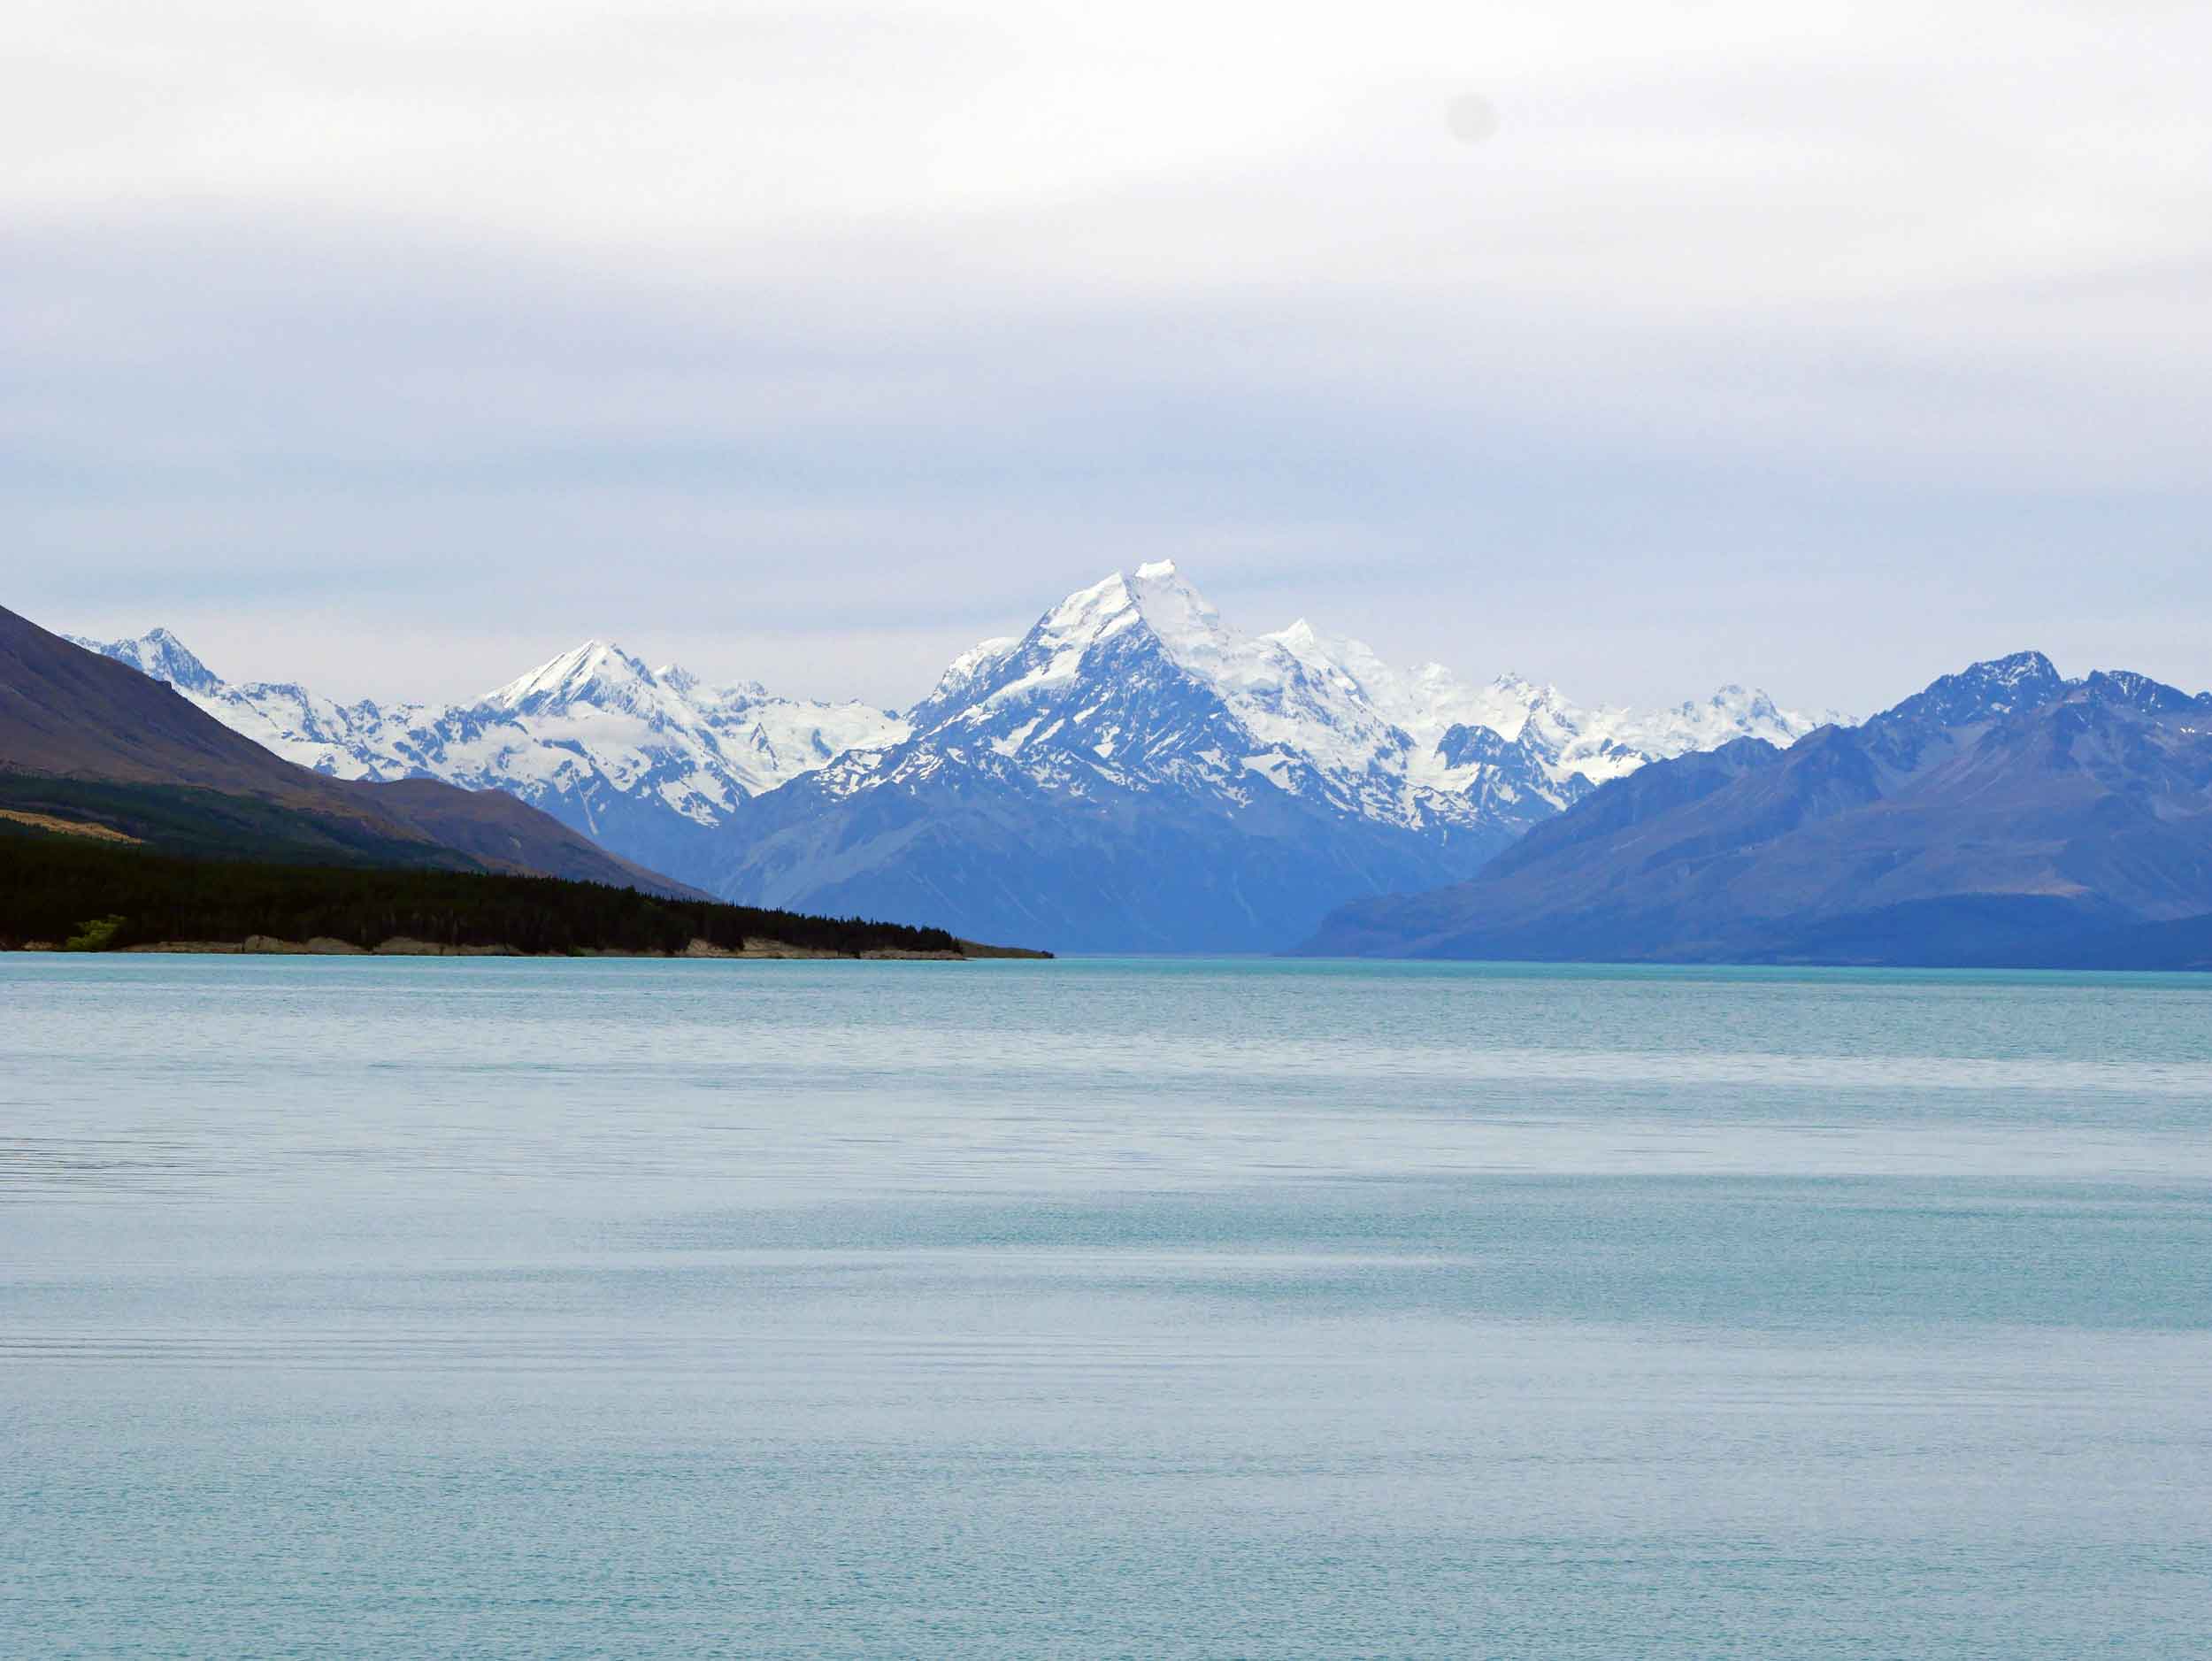  Stunning Mt. Cook is New Zealand's highest mountain with Lake Pukaki in the foreground (Jan 10).&nbsp; 